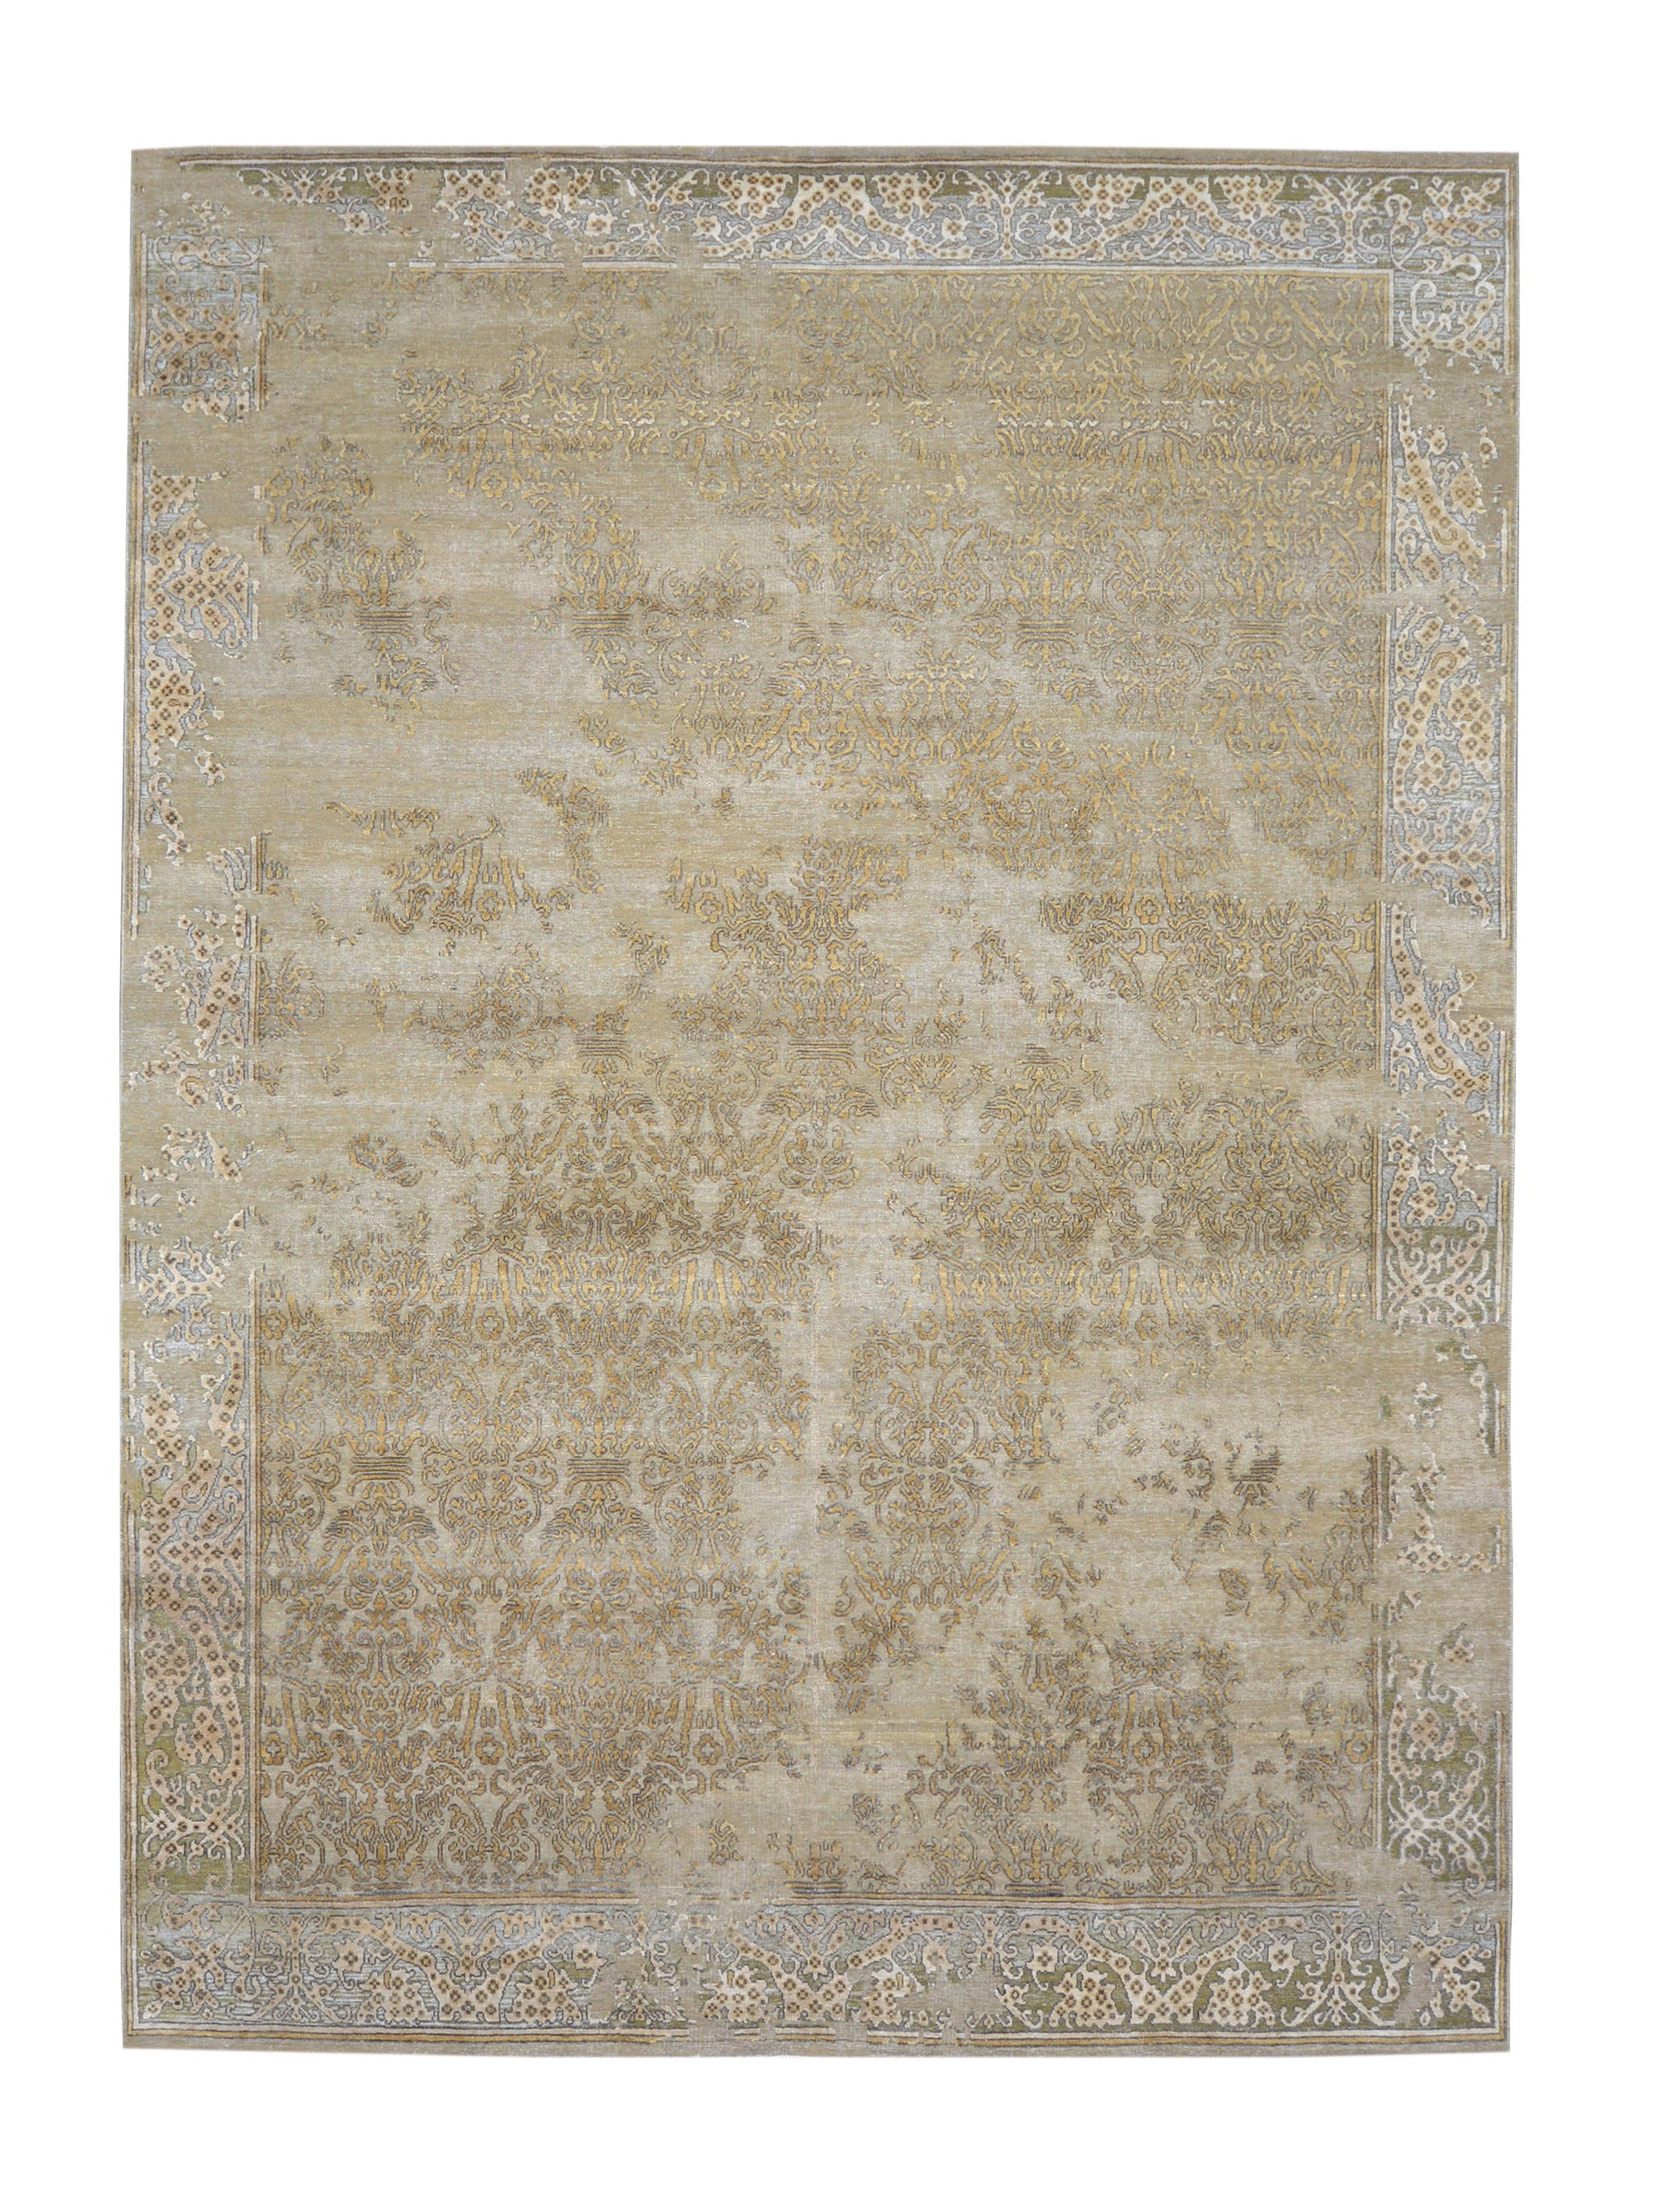 Get trendy with Camel, Gold Pure Silk Erased Handknotted Distressed Area Rug - Contemporary Rugs available at Jaipur Oriental Rugs. Grab yours for $7665.00 today!